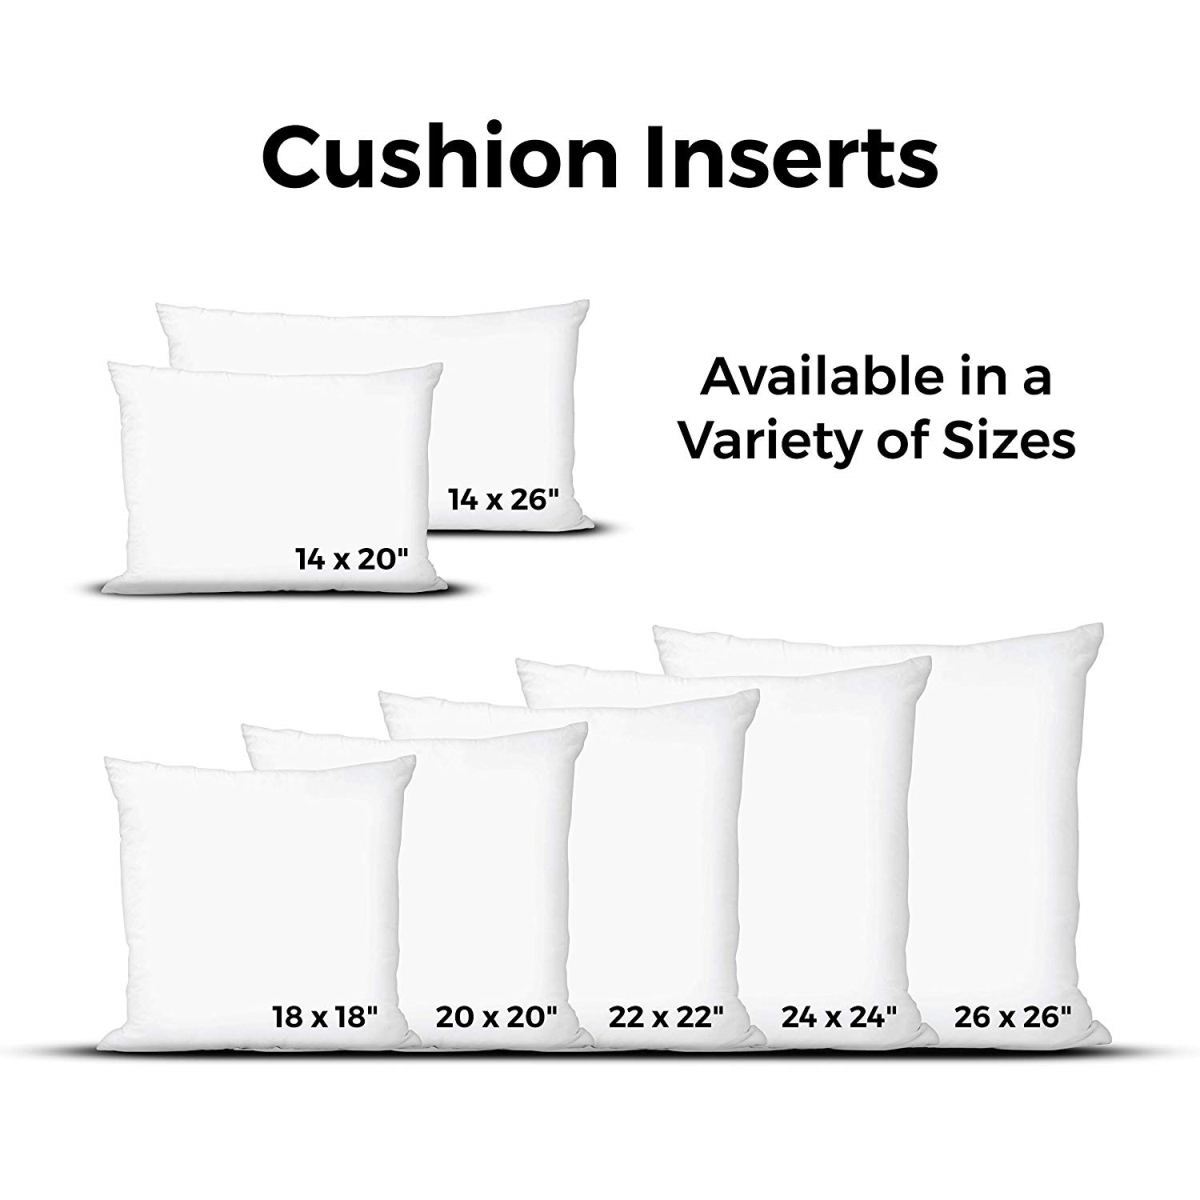 Westex 602222 22 x 22 in. Feather Cushion Insert, White